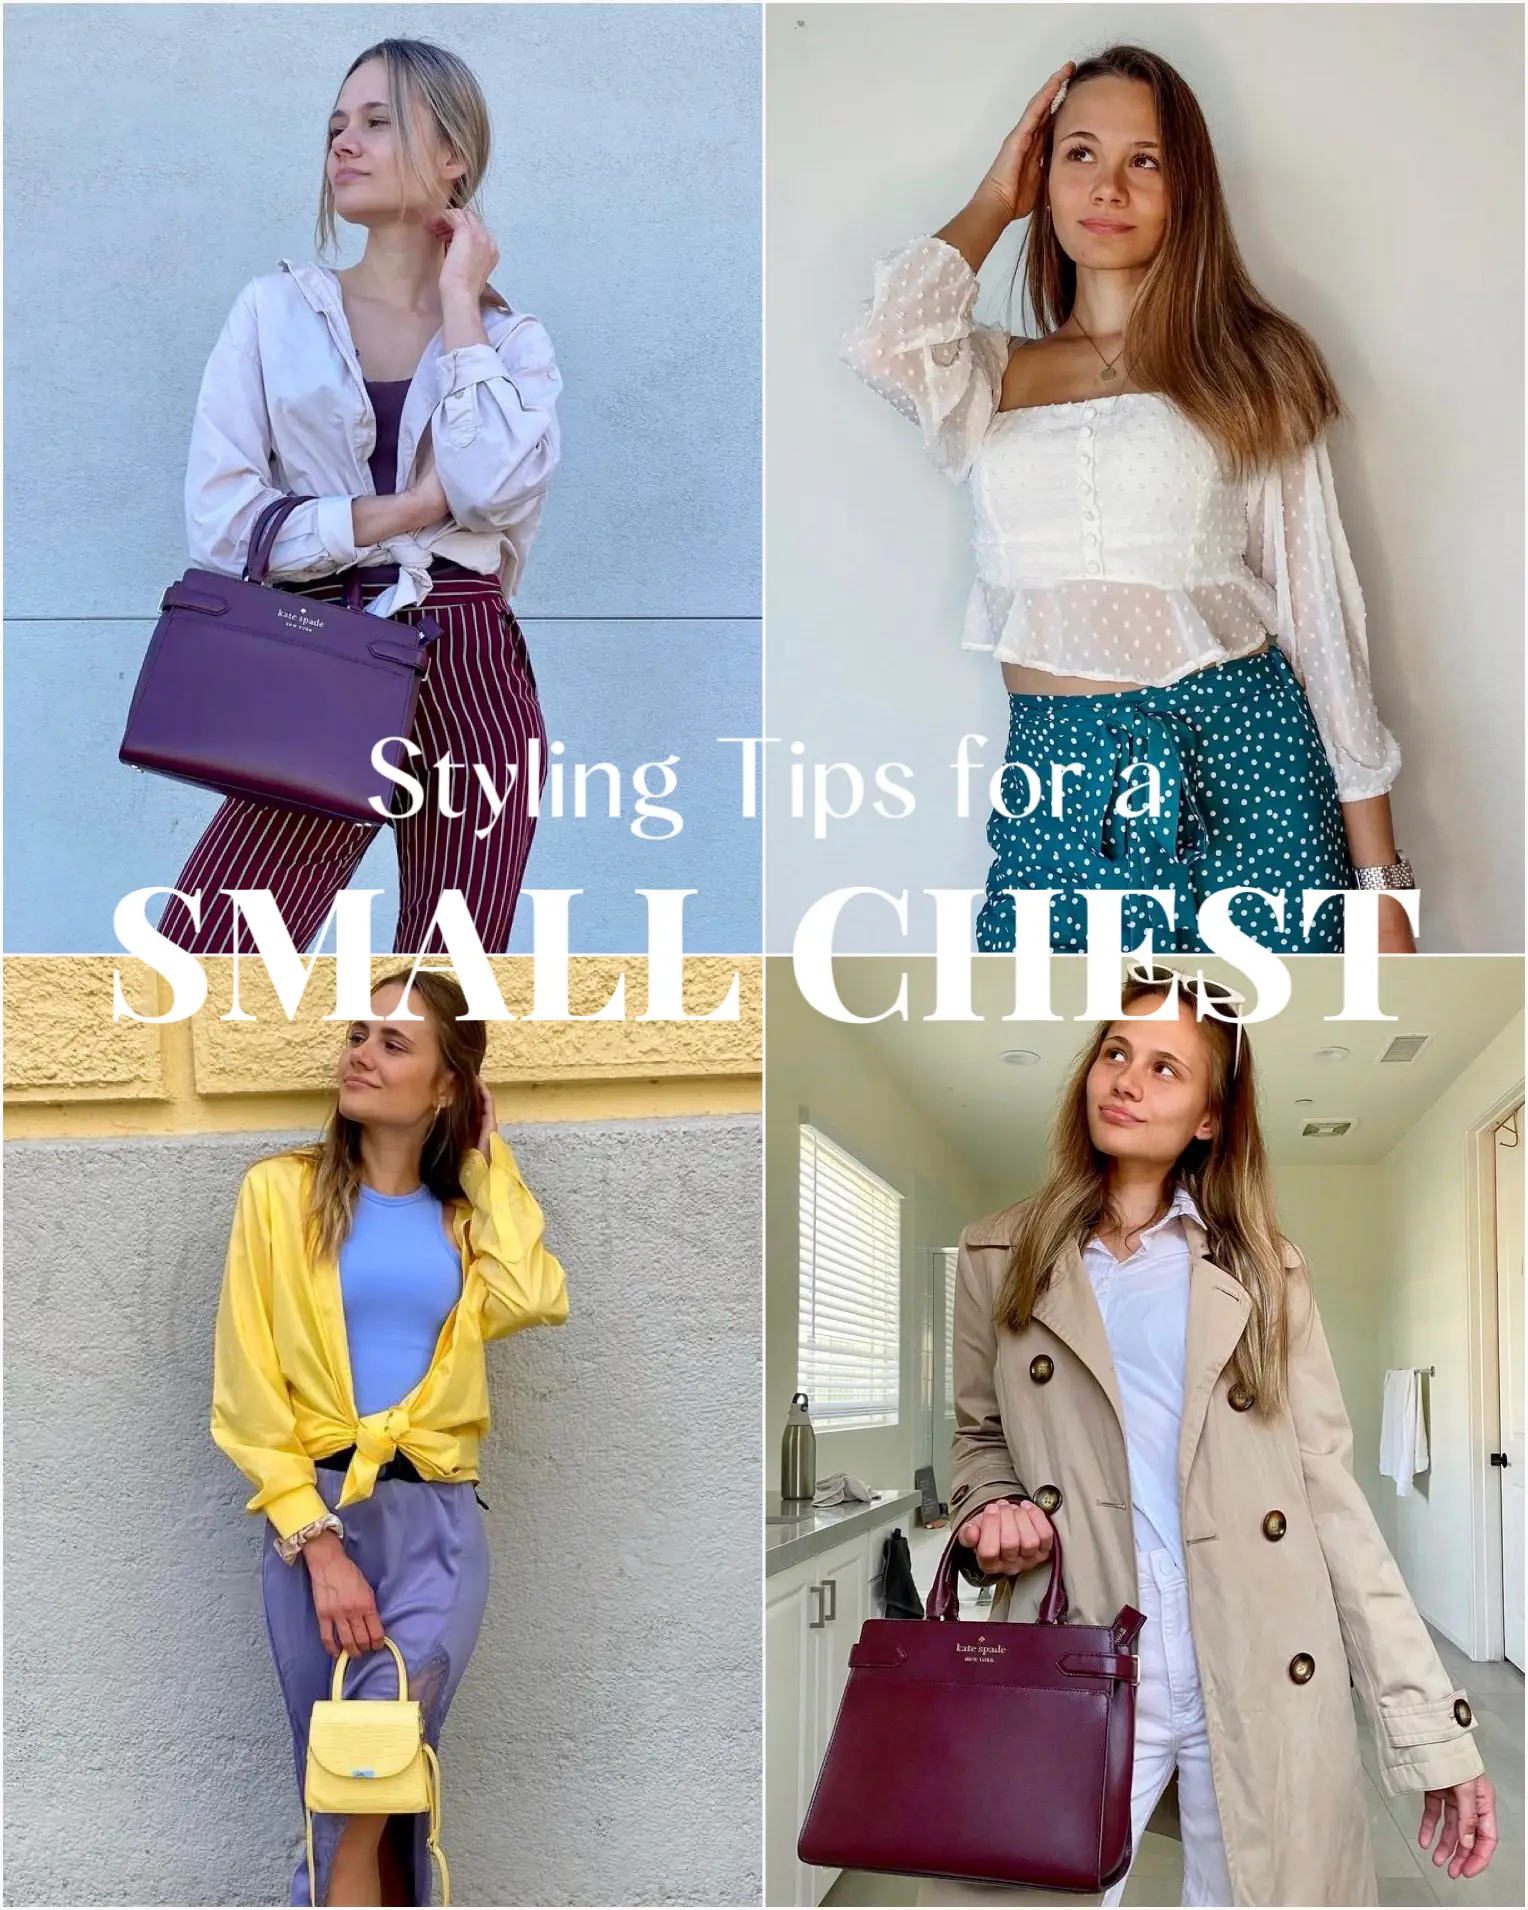 How to Dress If You Have a SMALL CHEST